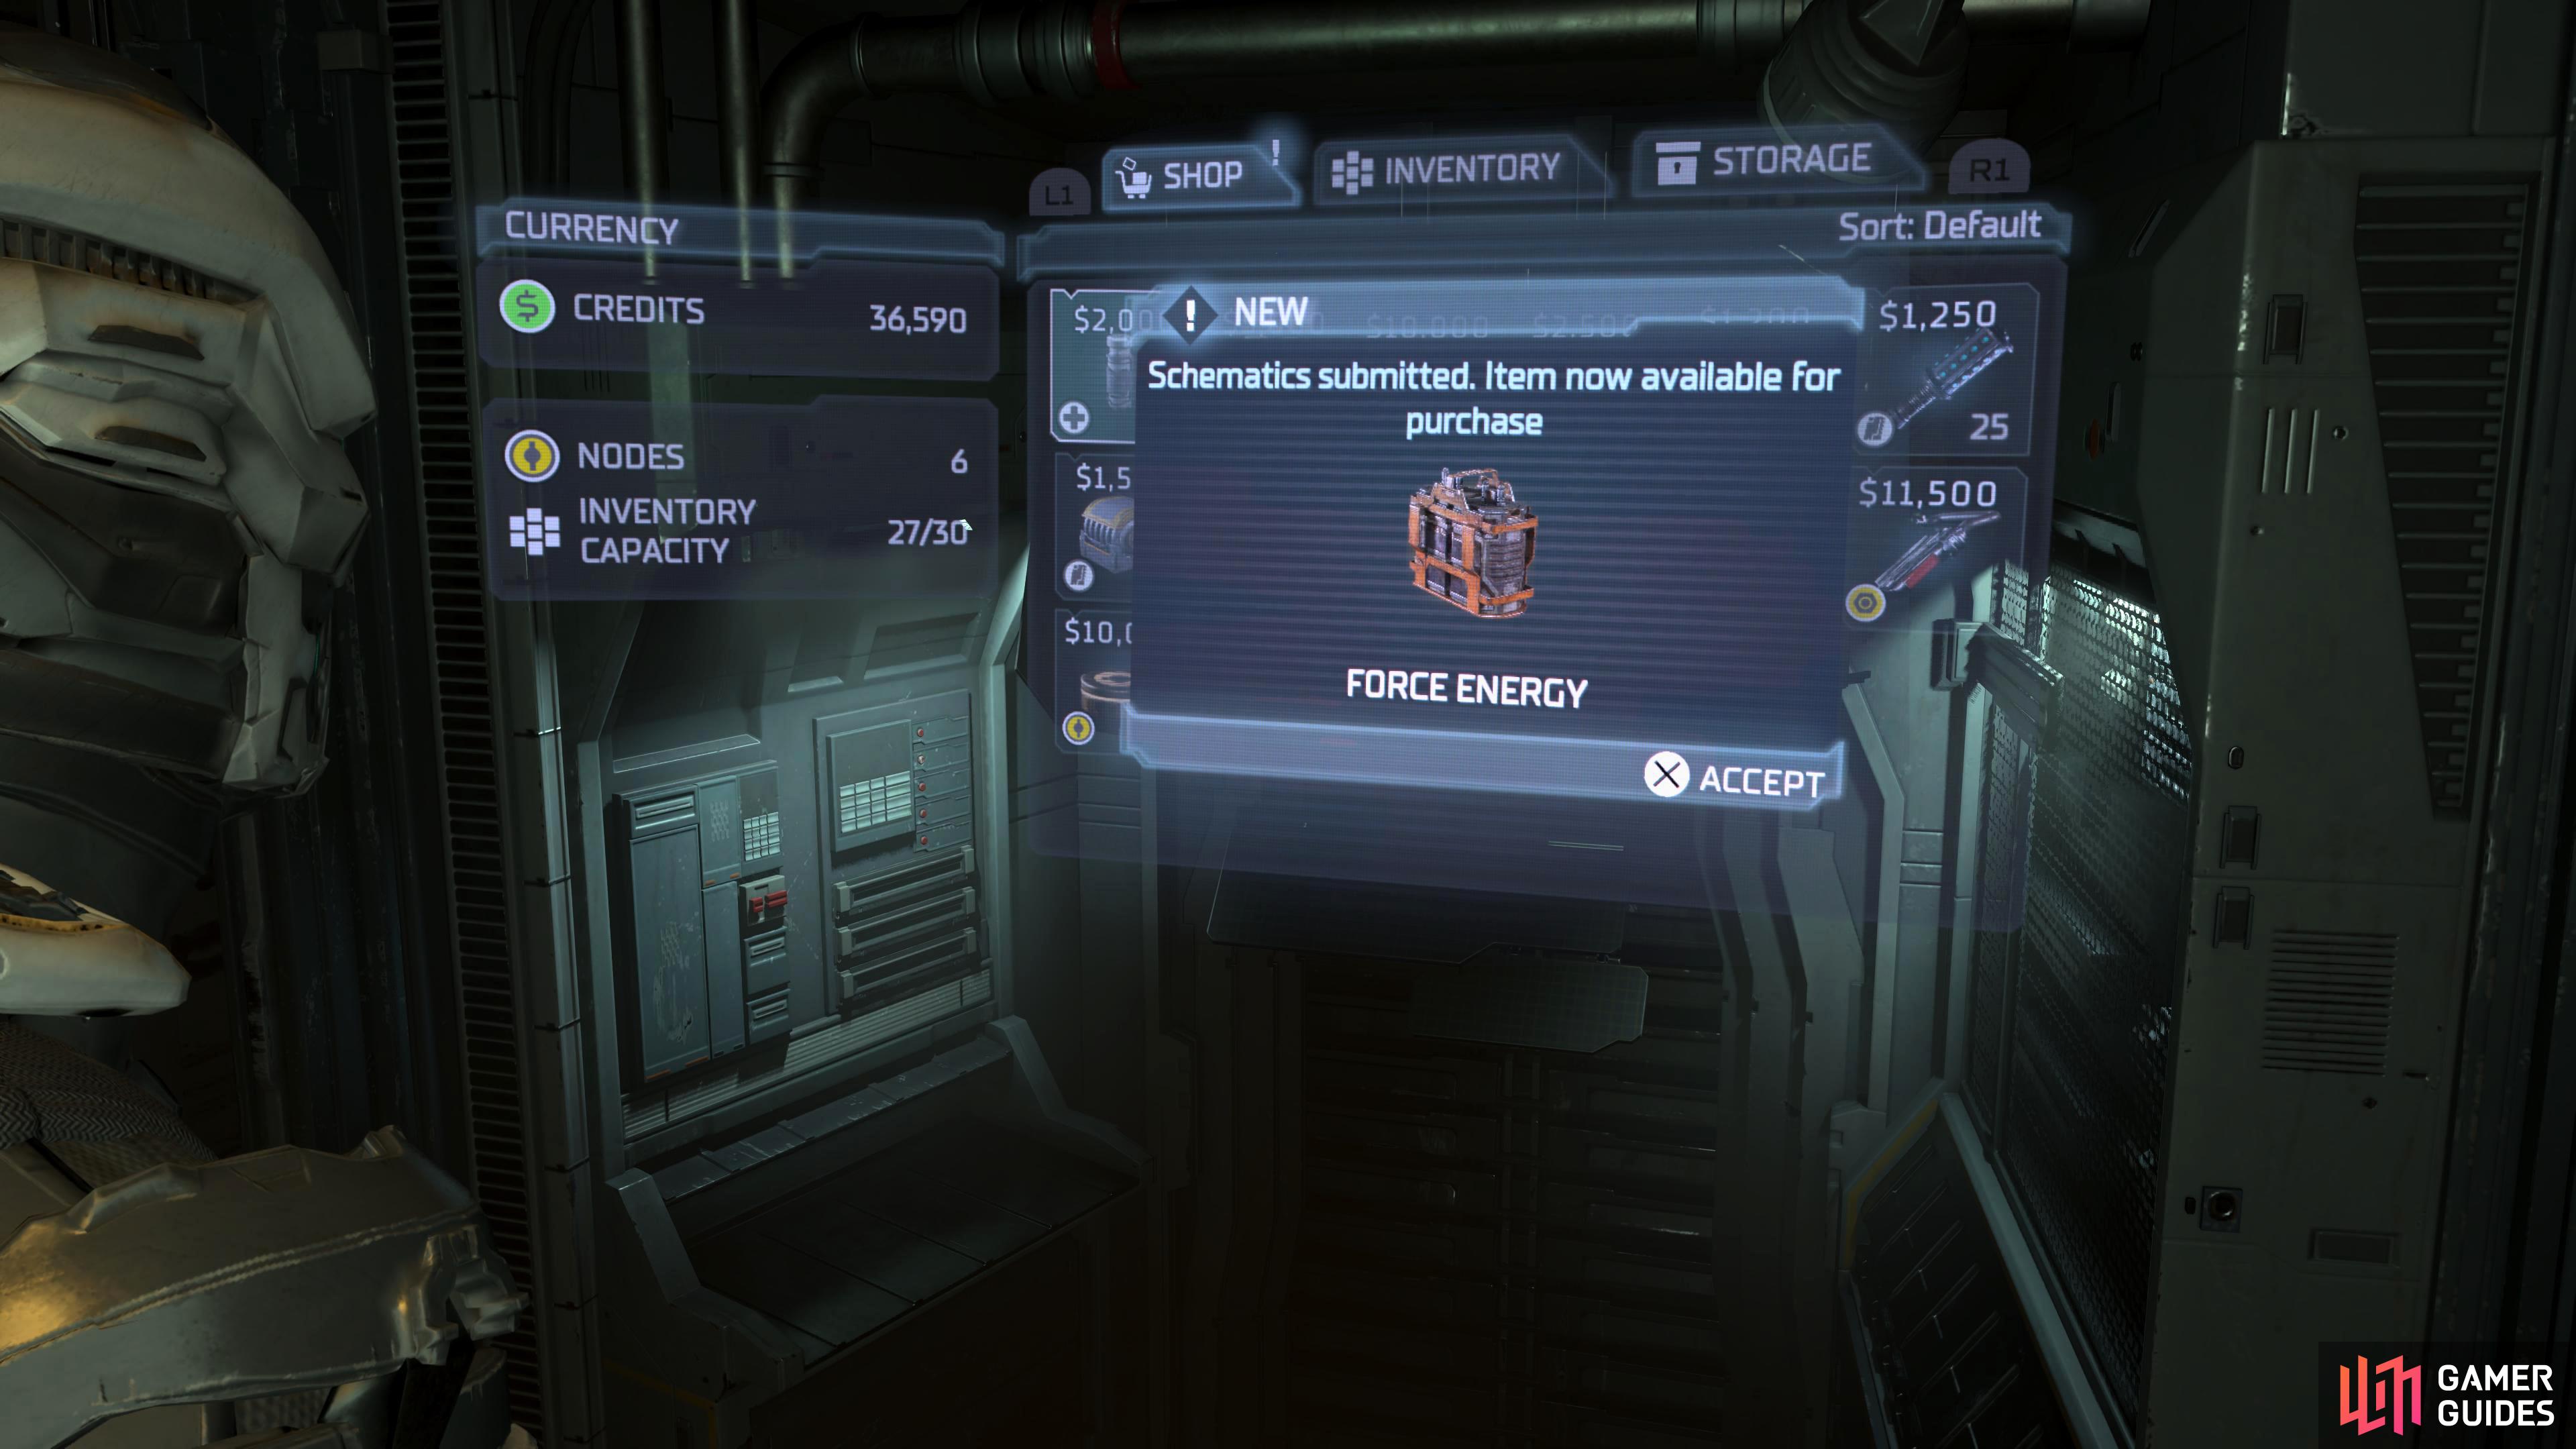 Finding the Force Energy schematic allows you to purchase Force Gun Ammo at the Stores.